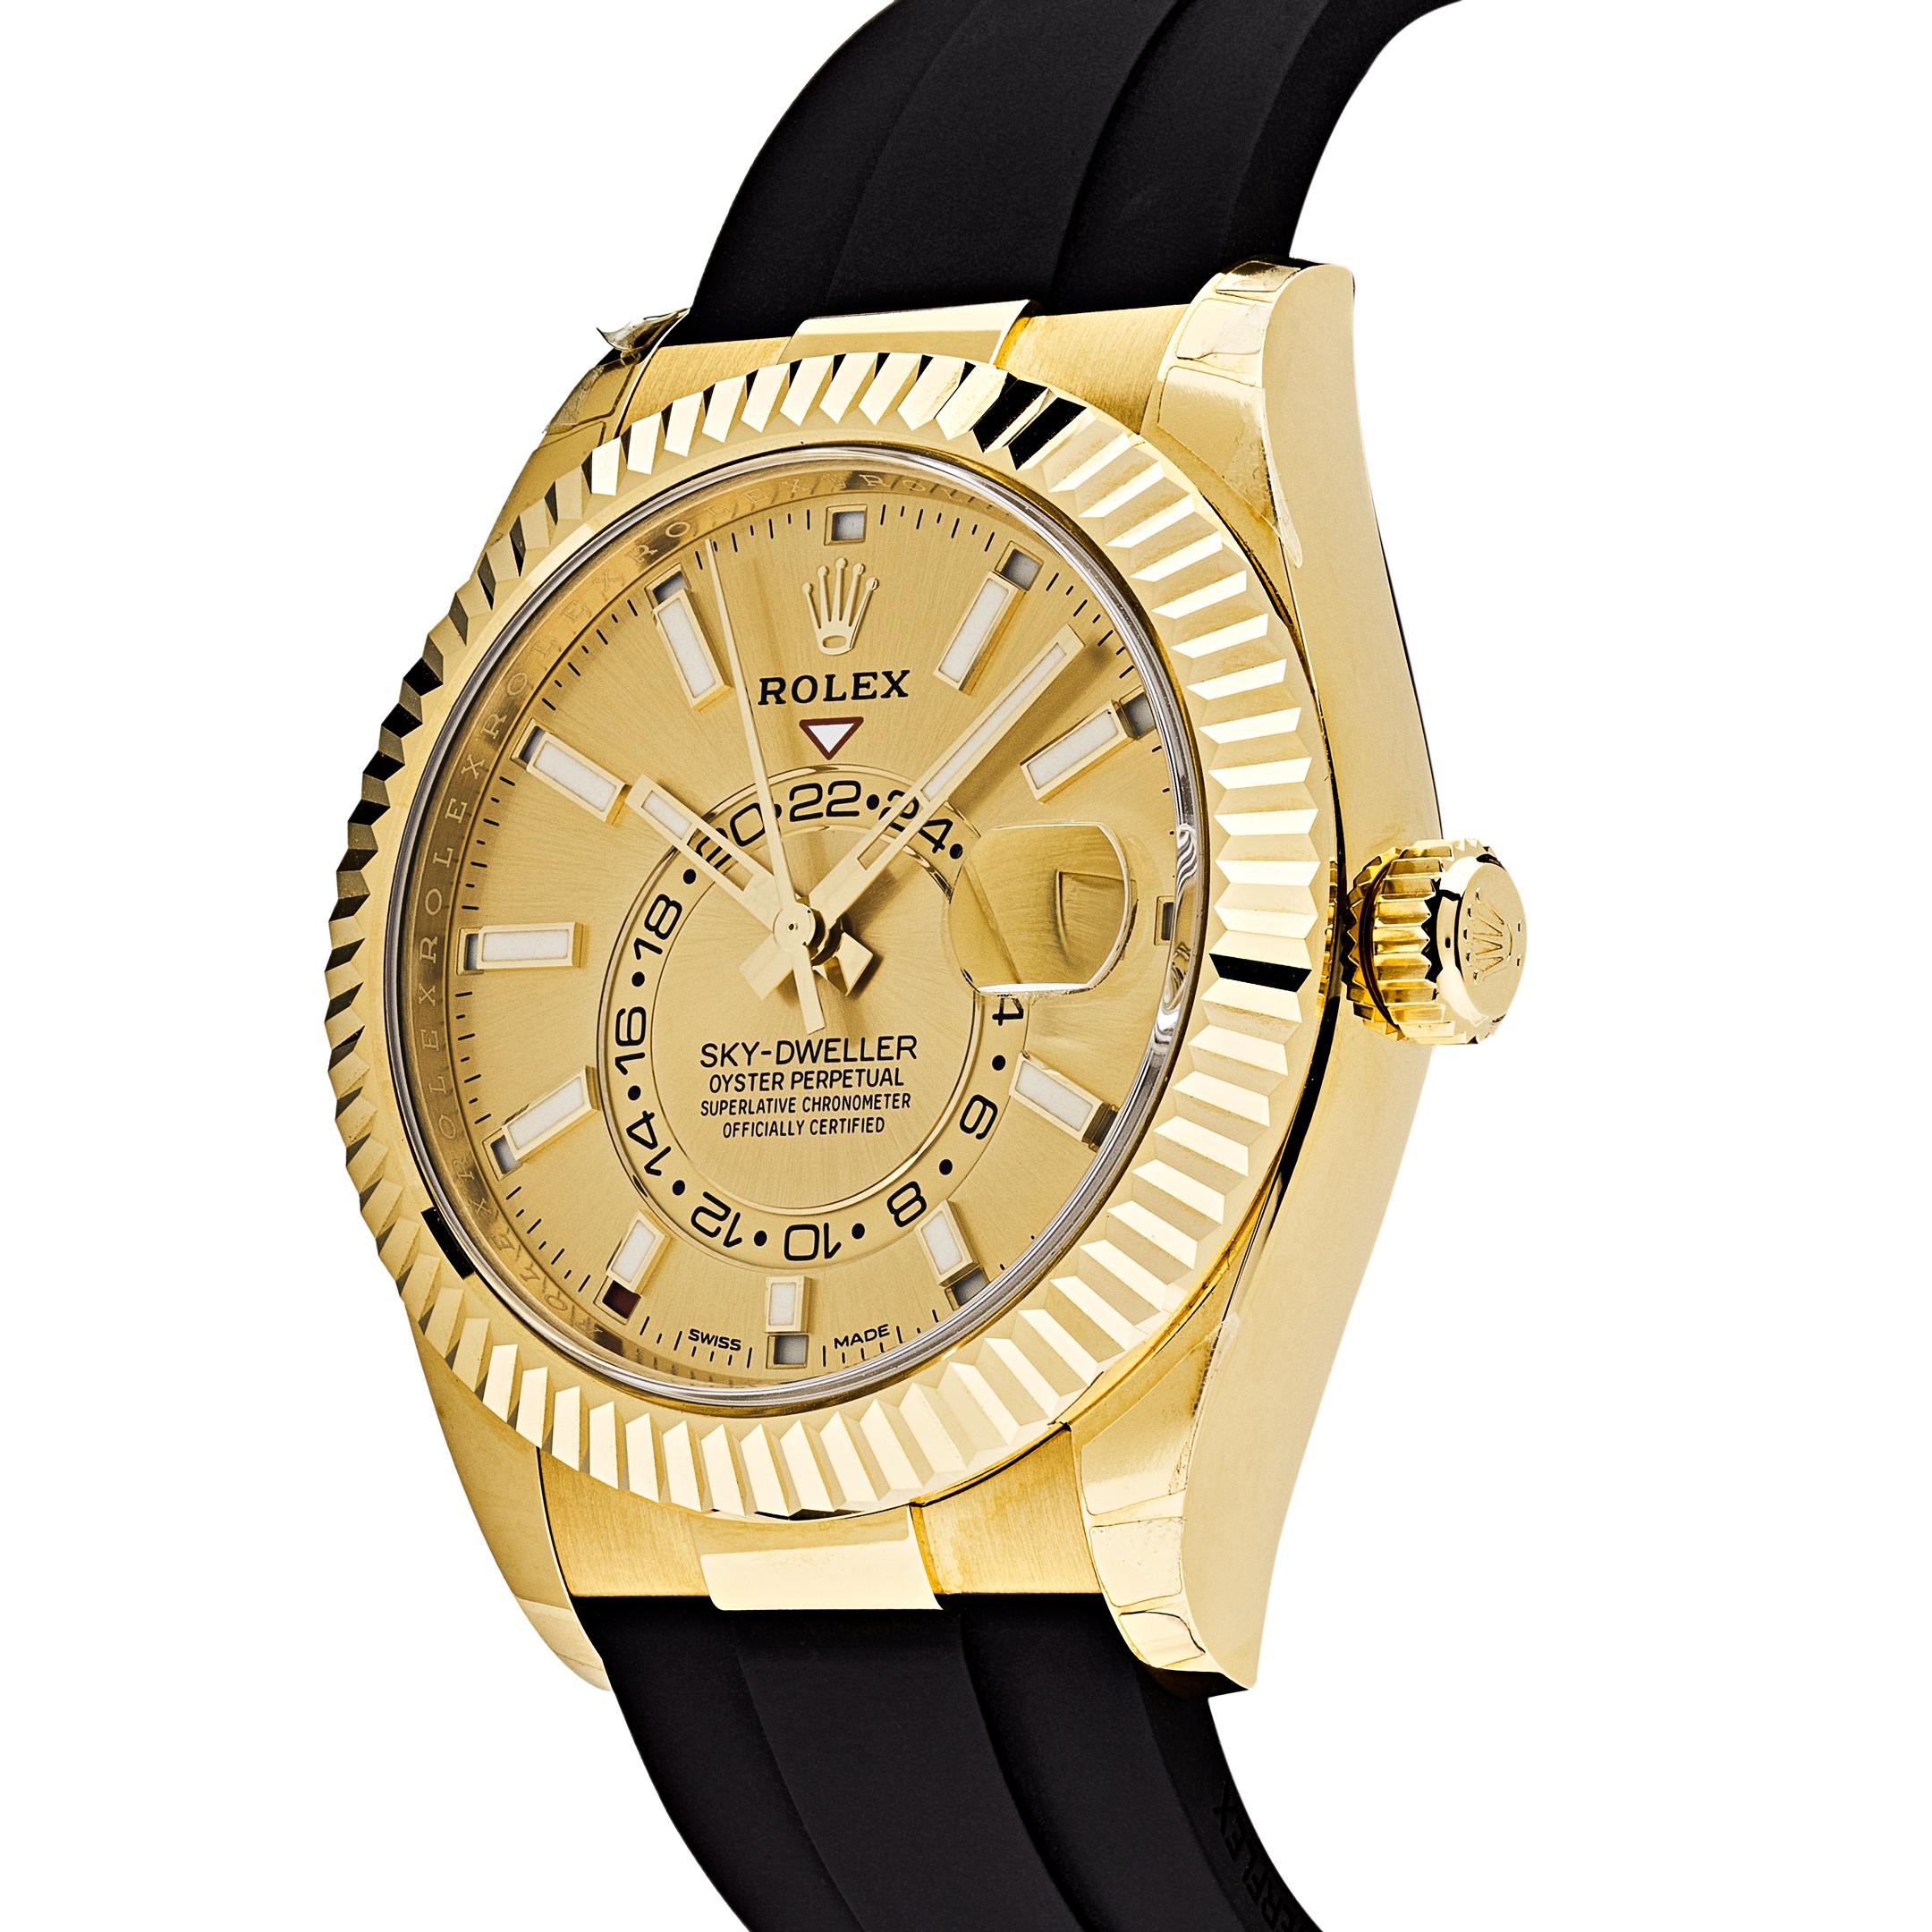 This Rolex Sky-Dweller features dual time zones, inlaid in a 42mm 18k yellow gold case and fluted bezel surrounding a champagne dial with luminous hour markers. The Ring Command bezel can be rotated to select the date, the local time and the